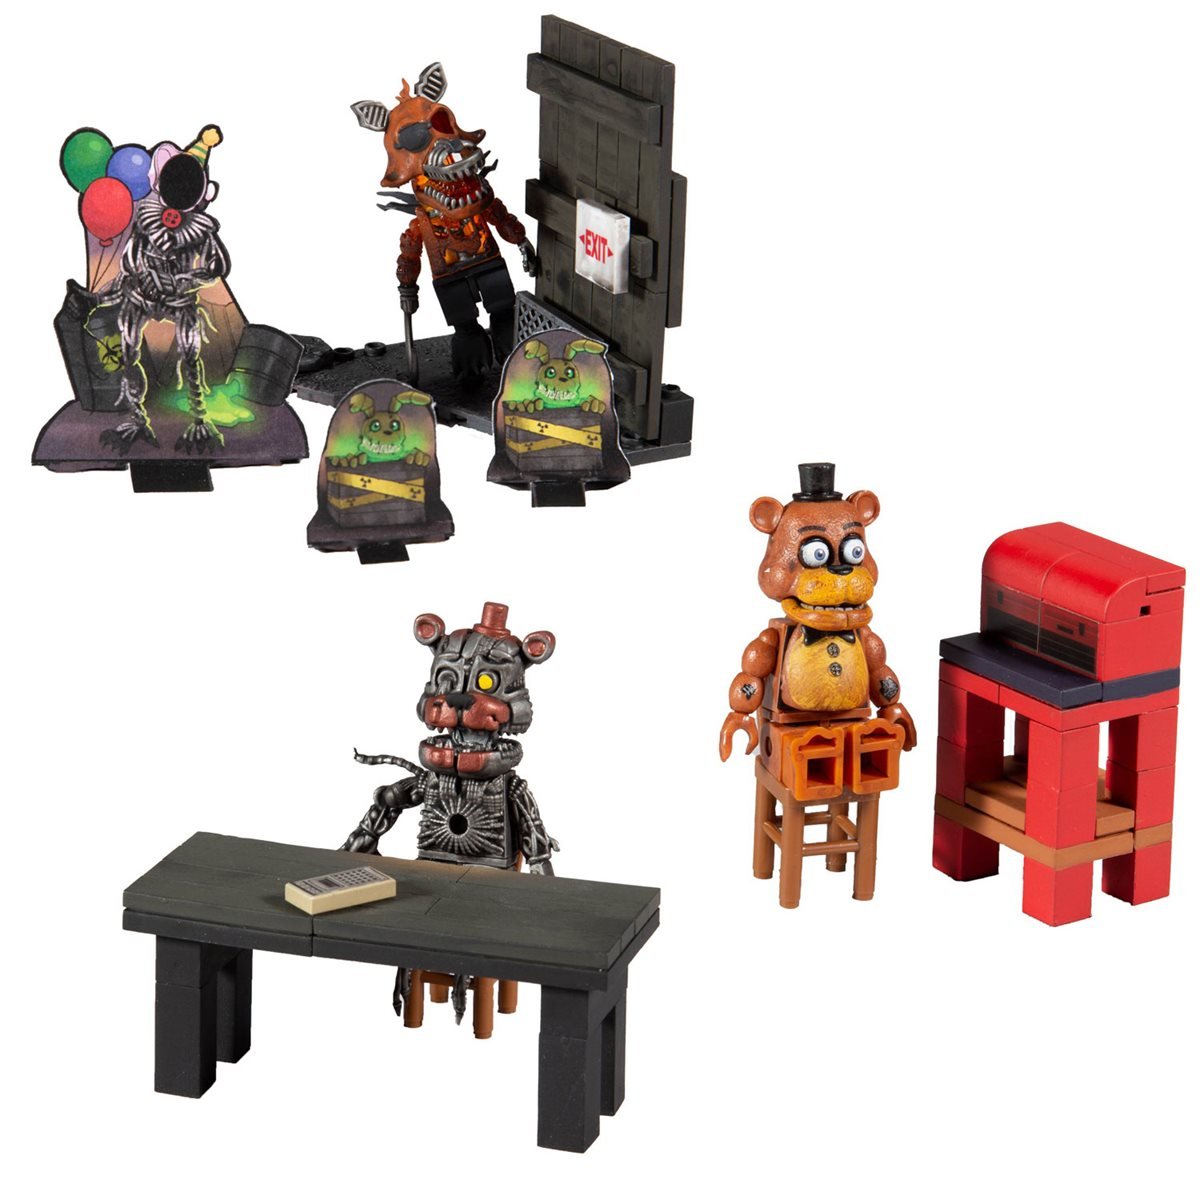 Five Nights at Freddy's Micro Construction Set Series 6 McFarlane Toys